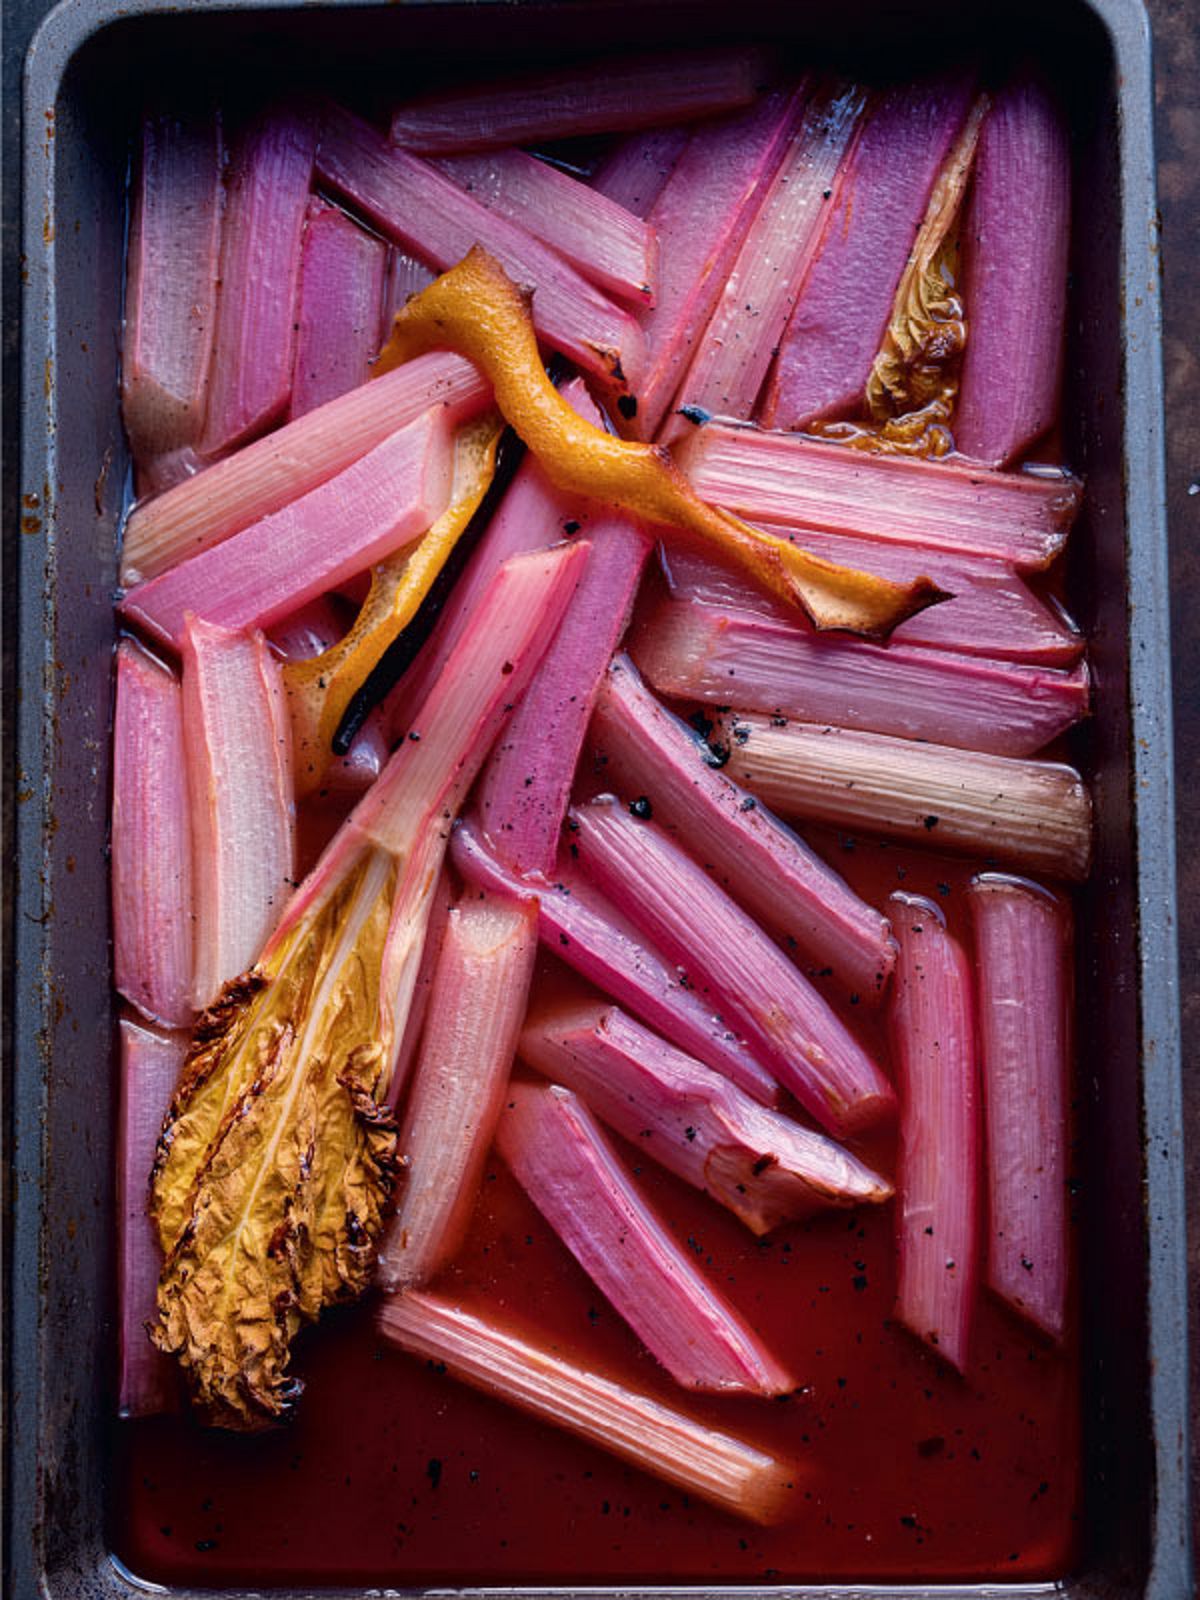 Baked Rhubarb with Sweet Labneh